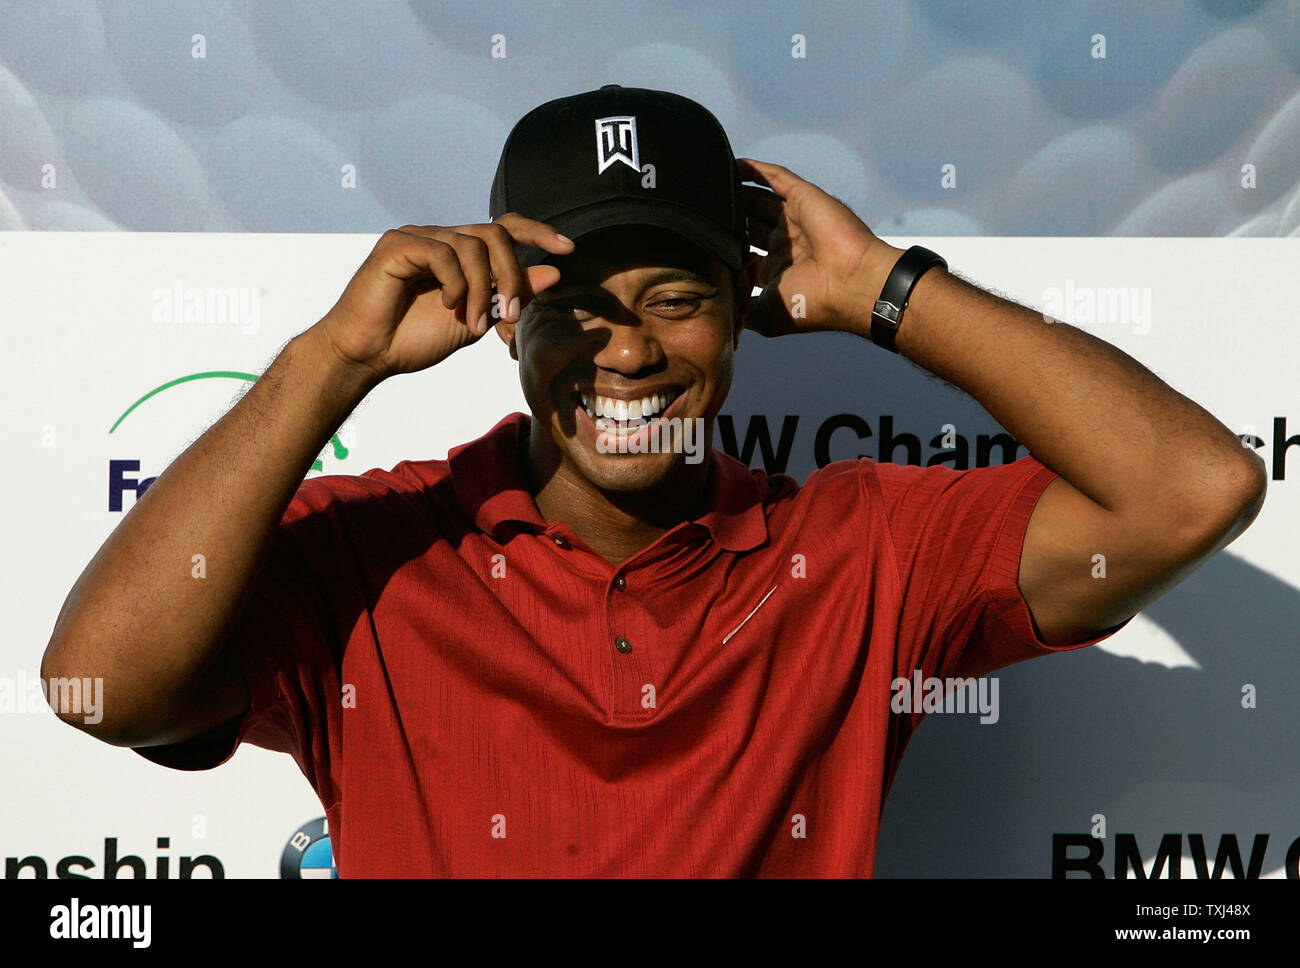 Tiger Woods adjusts his cap before acception the trophy after winning of the BMW Championship at Cog Hill Golf and Country Club in Lemont, Illinois on September 9, 2007. Woods finished with a 22-under par 262 for the four rounds of the tournament. (UPI Photo/Brian Kersey) Stock Photo